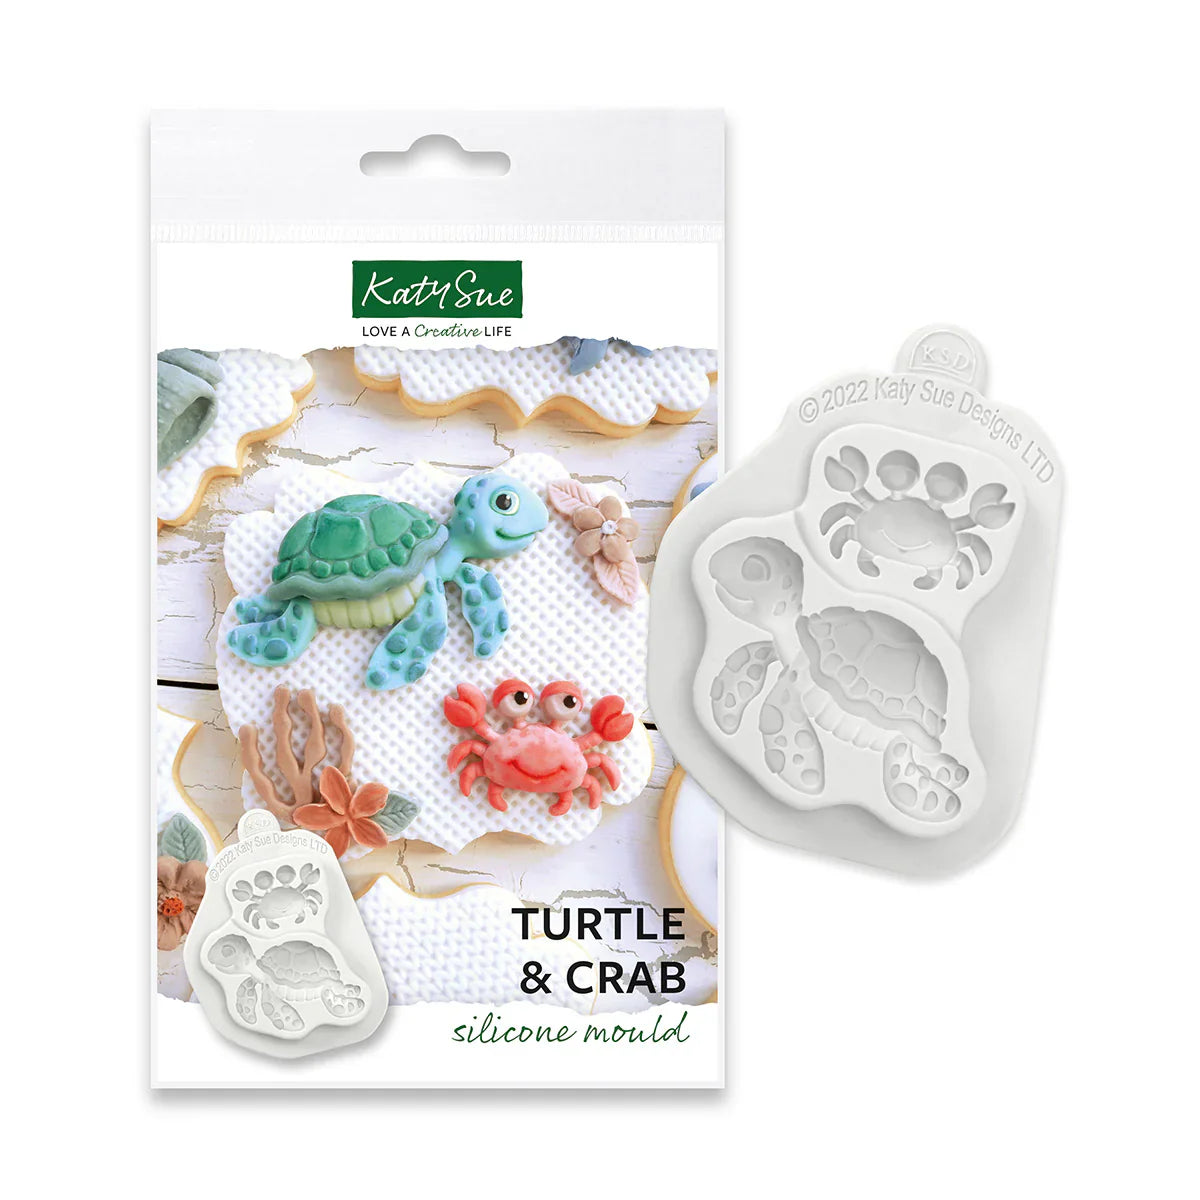 Turtle & Crab Silicone Moulds